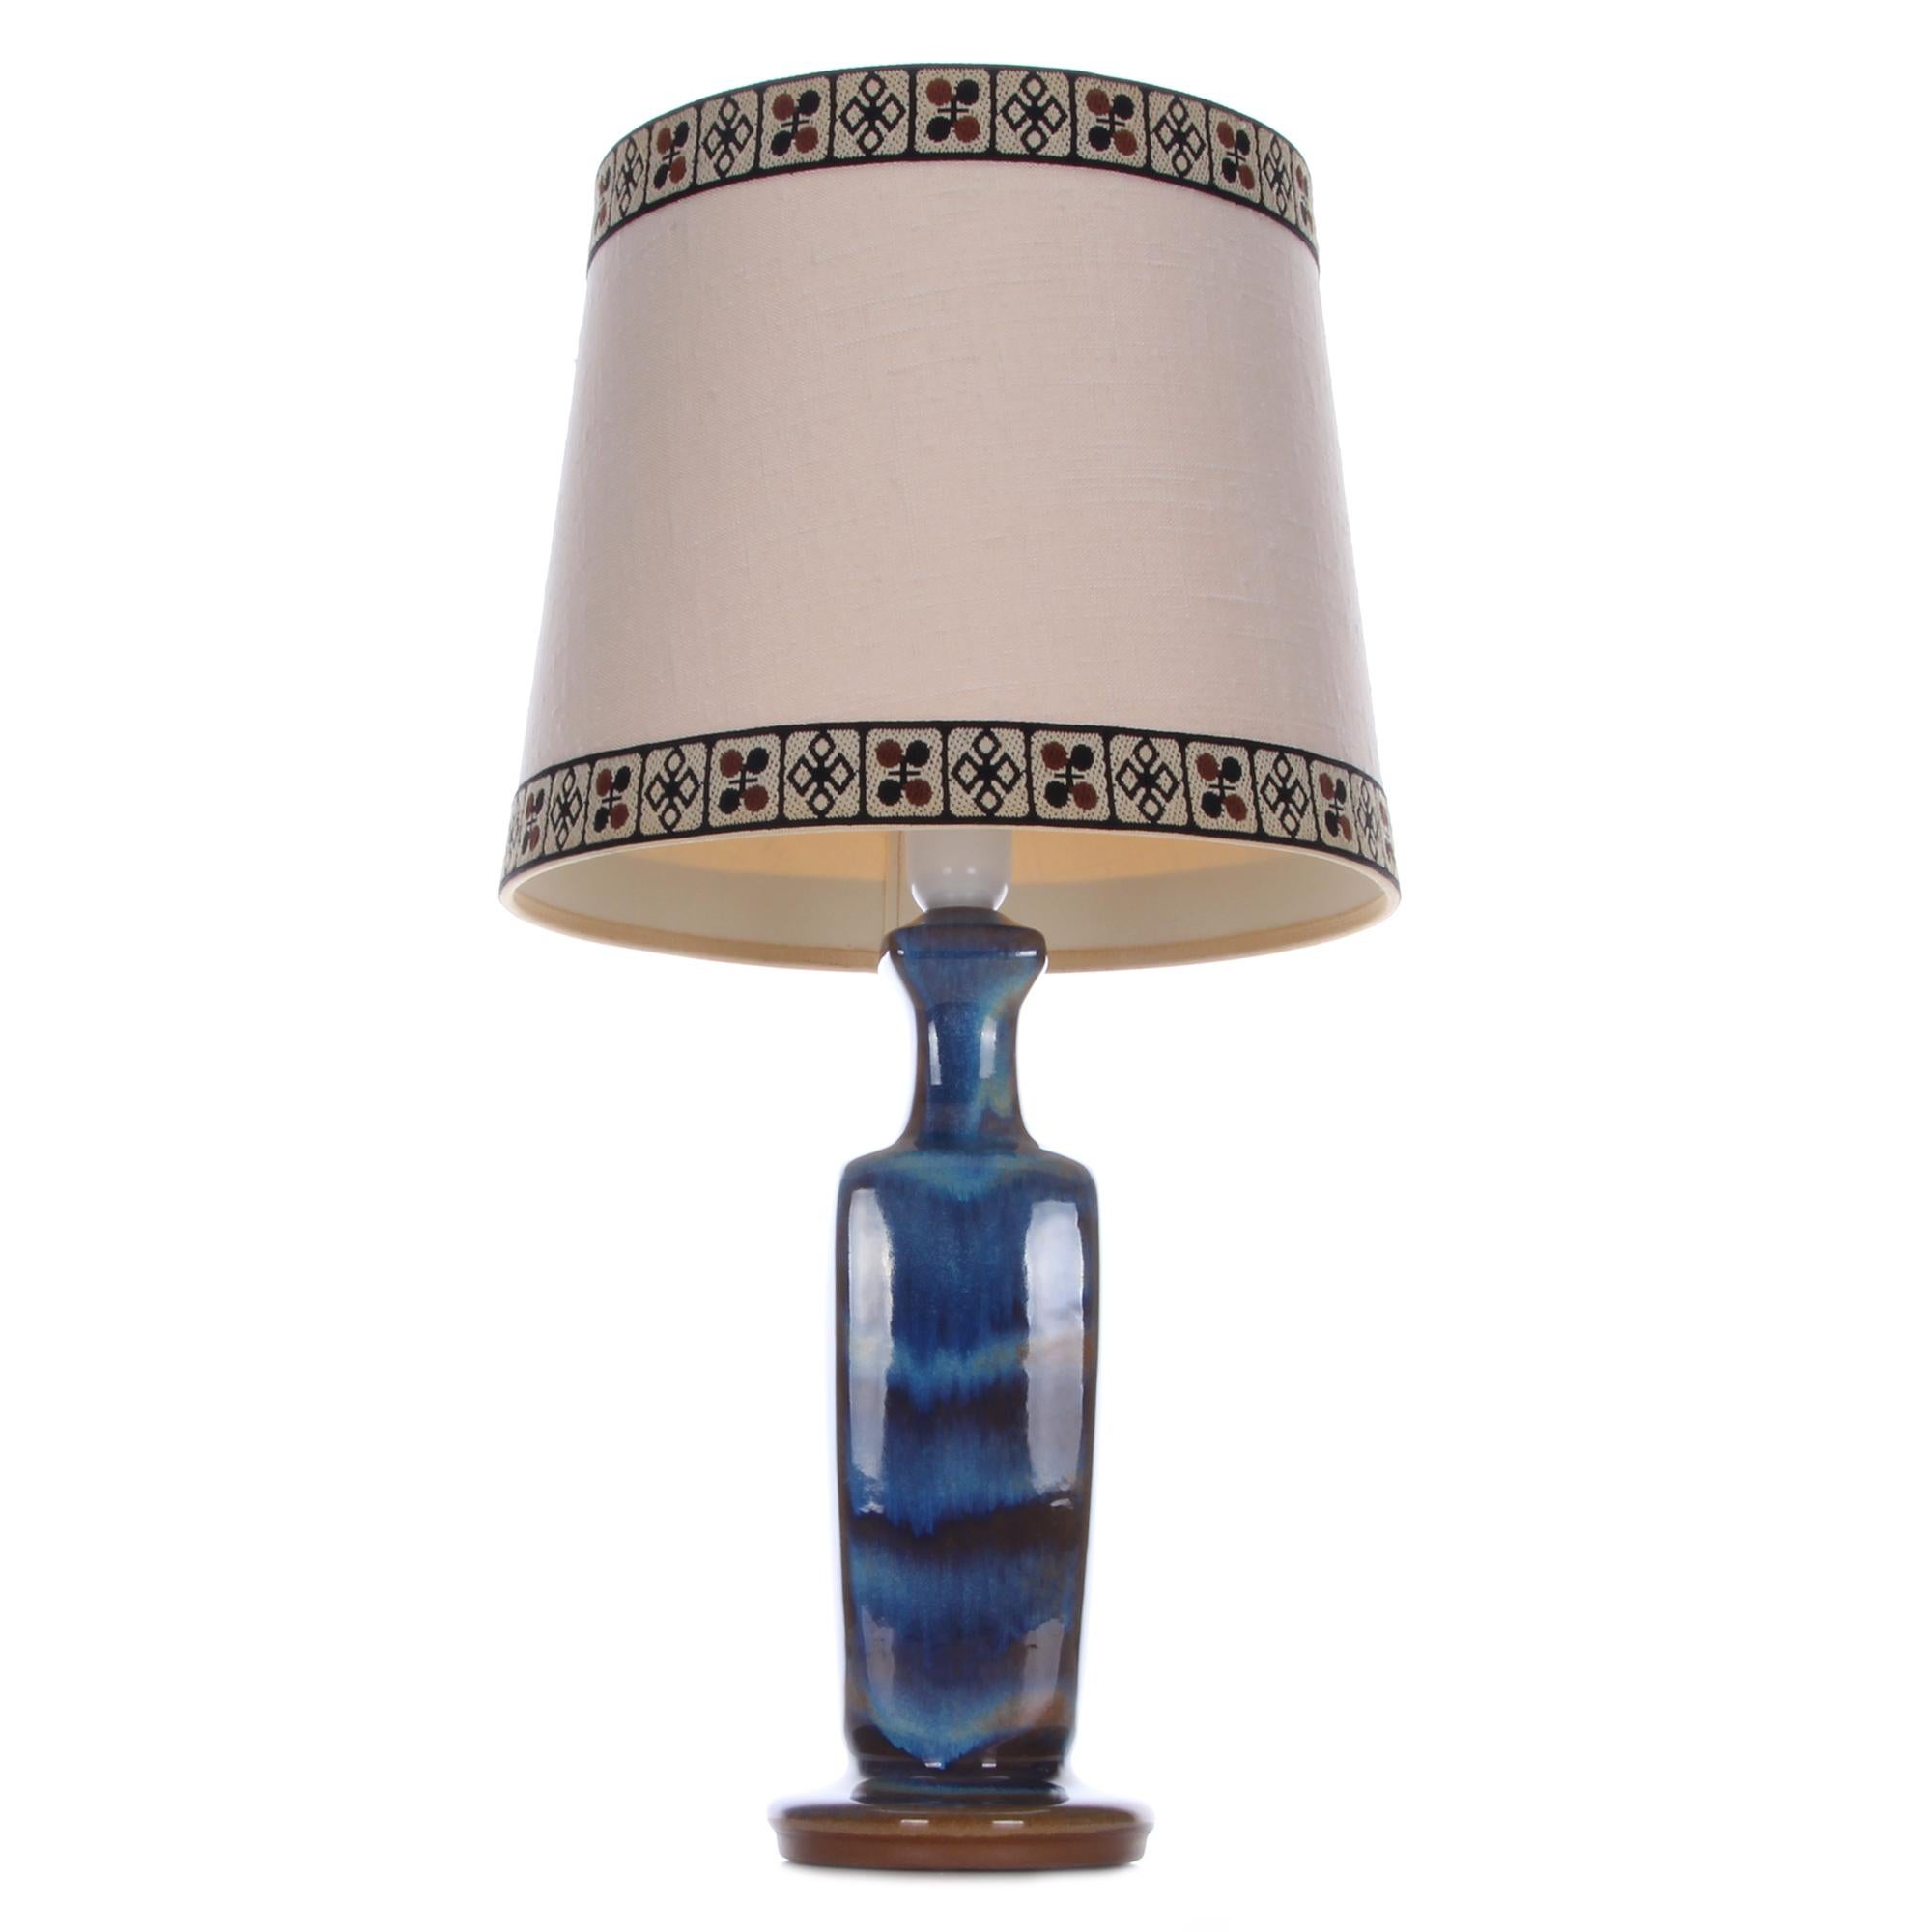 Scandinavian Modern Blue Table Lamp by Michael Andersen & Son 1960s, with Vintage Shade Included